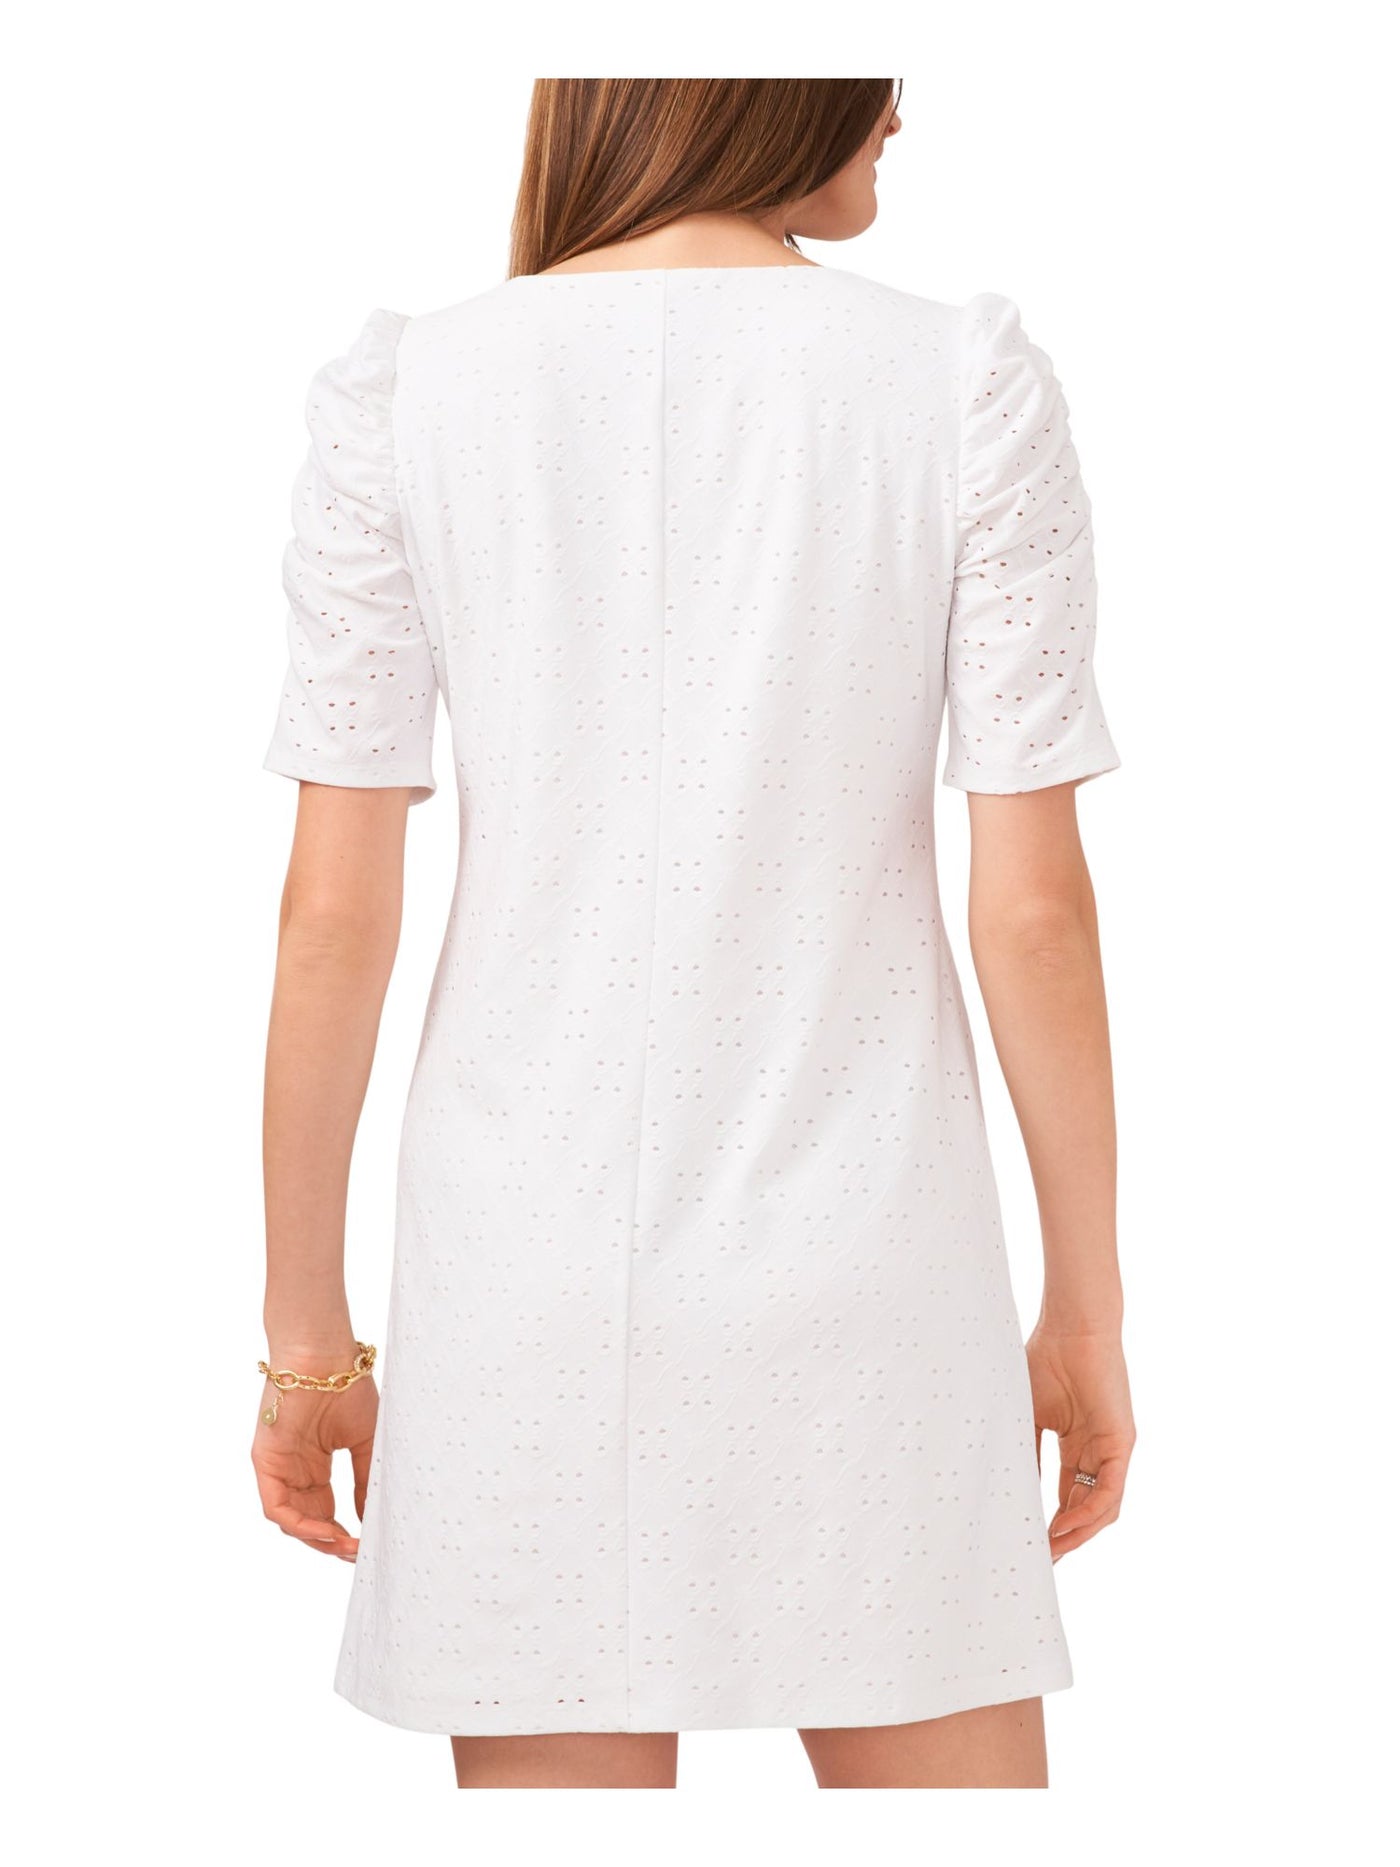 MSK Womens White Cut Out Lined Short Sleeve Round Neck Above The Knee Shift Dress Petites PM